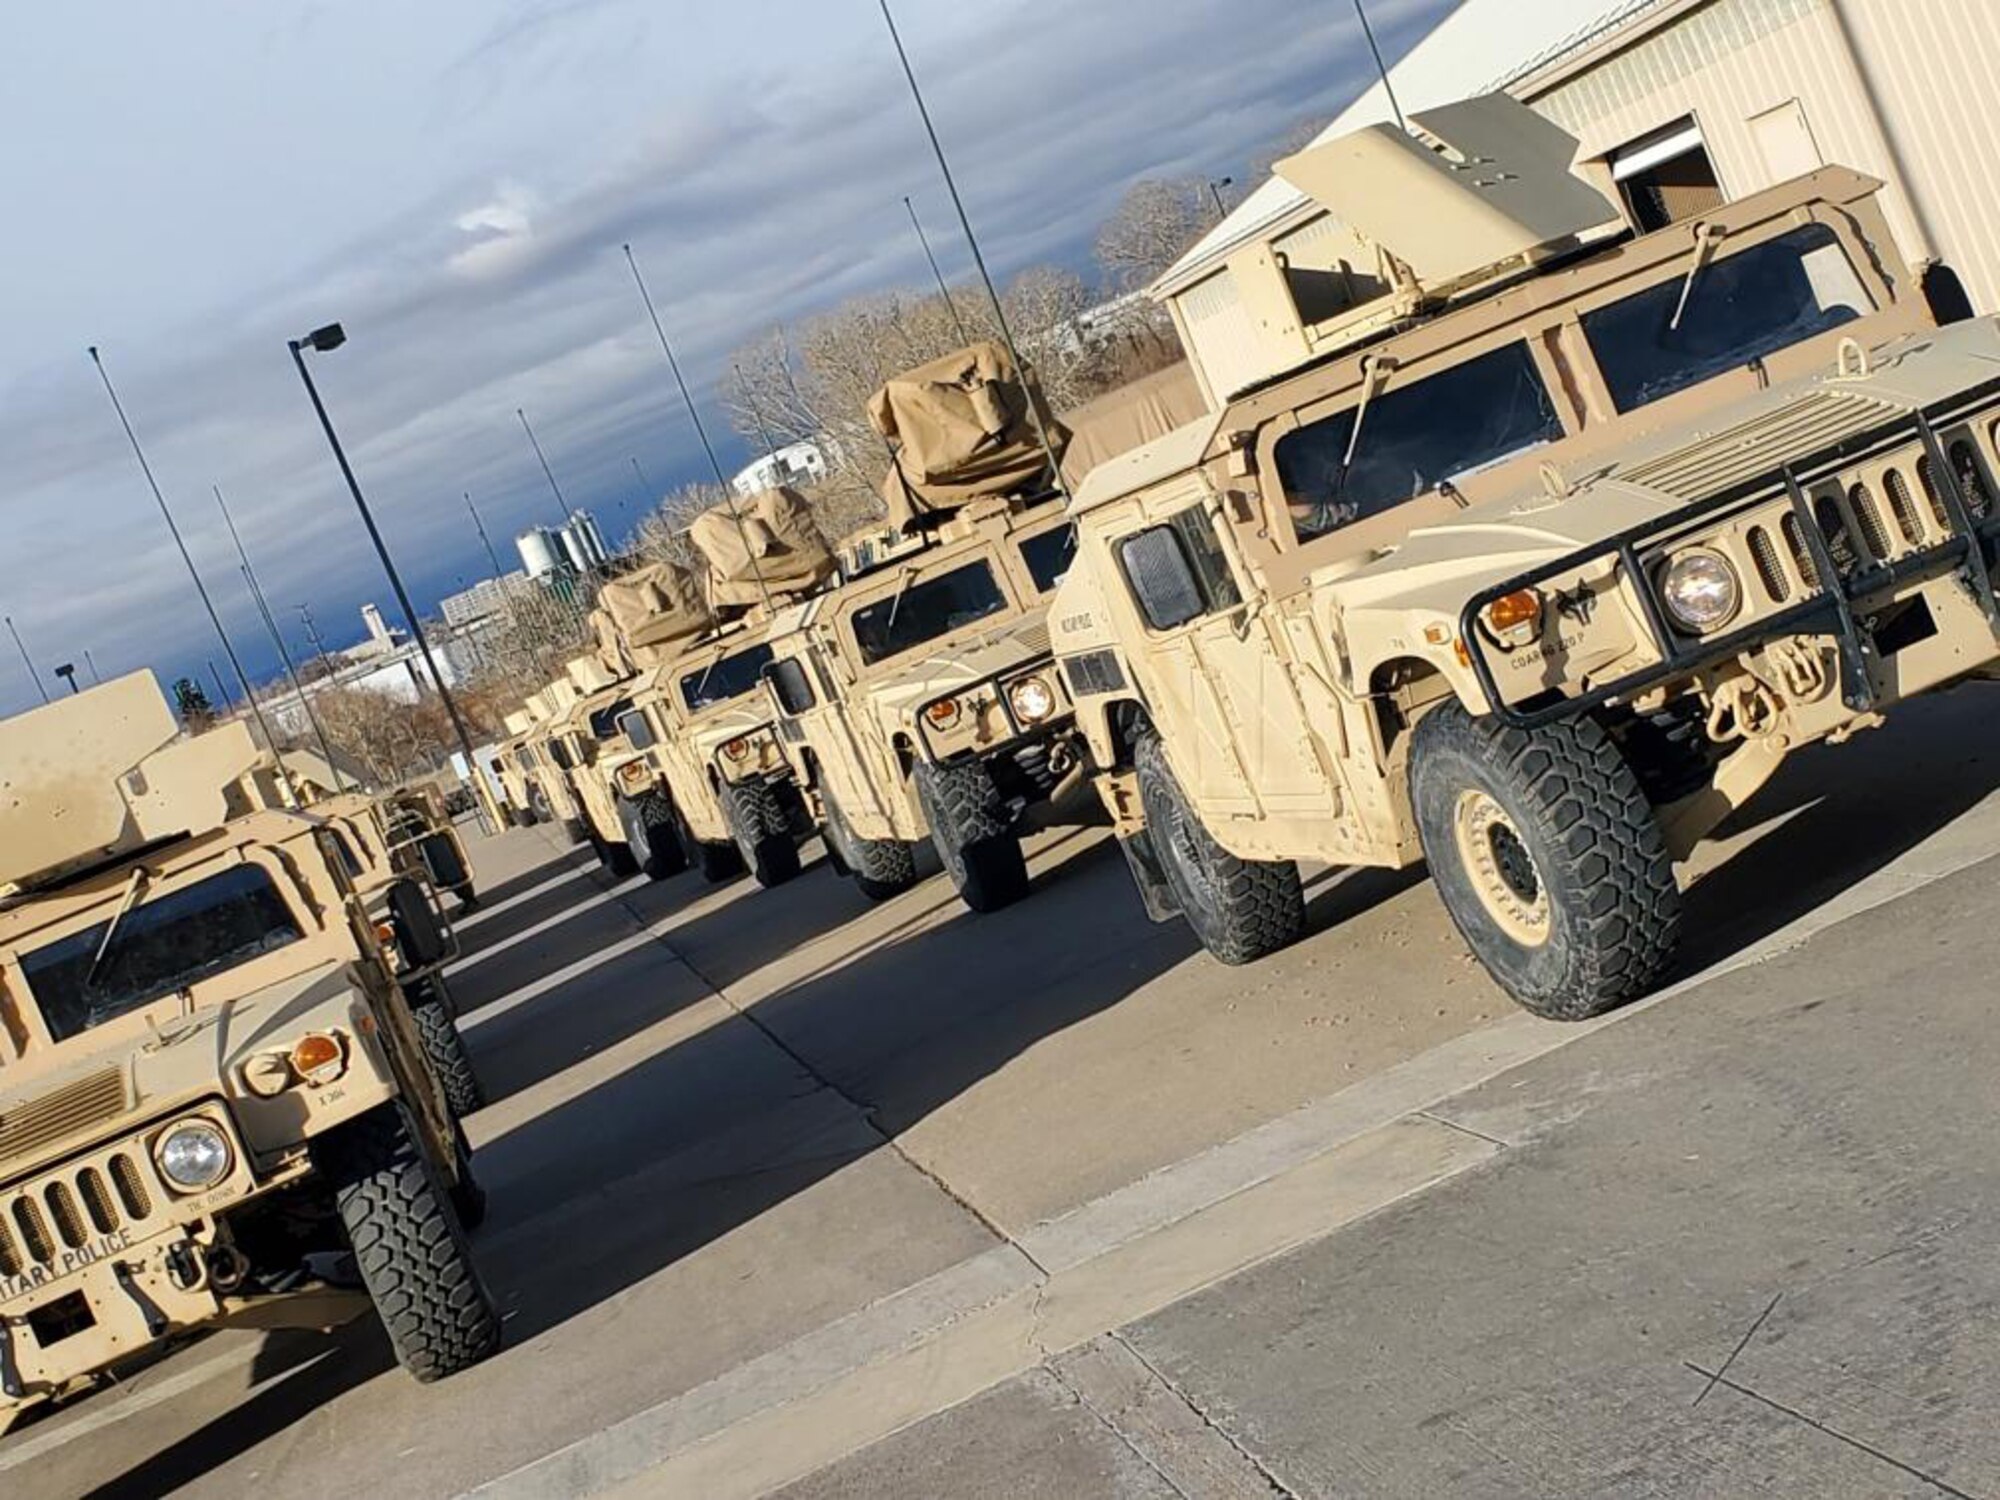 Colorado National Guard High Mobility Multipurpose Wheeled Vehicles stage at the Denver Armory to support the Boulder County Sheriff with traffic control, security operations and evacuation of people displaced by the Marshall Fire in Boulder County, Colorado, Dec. 31, 2021.